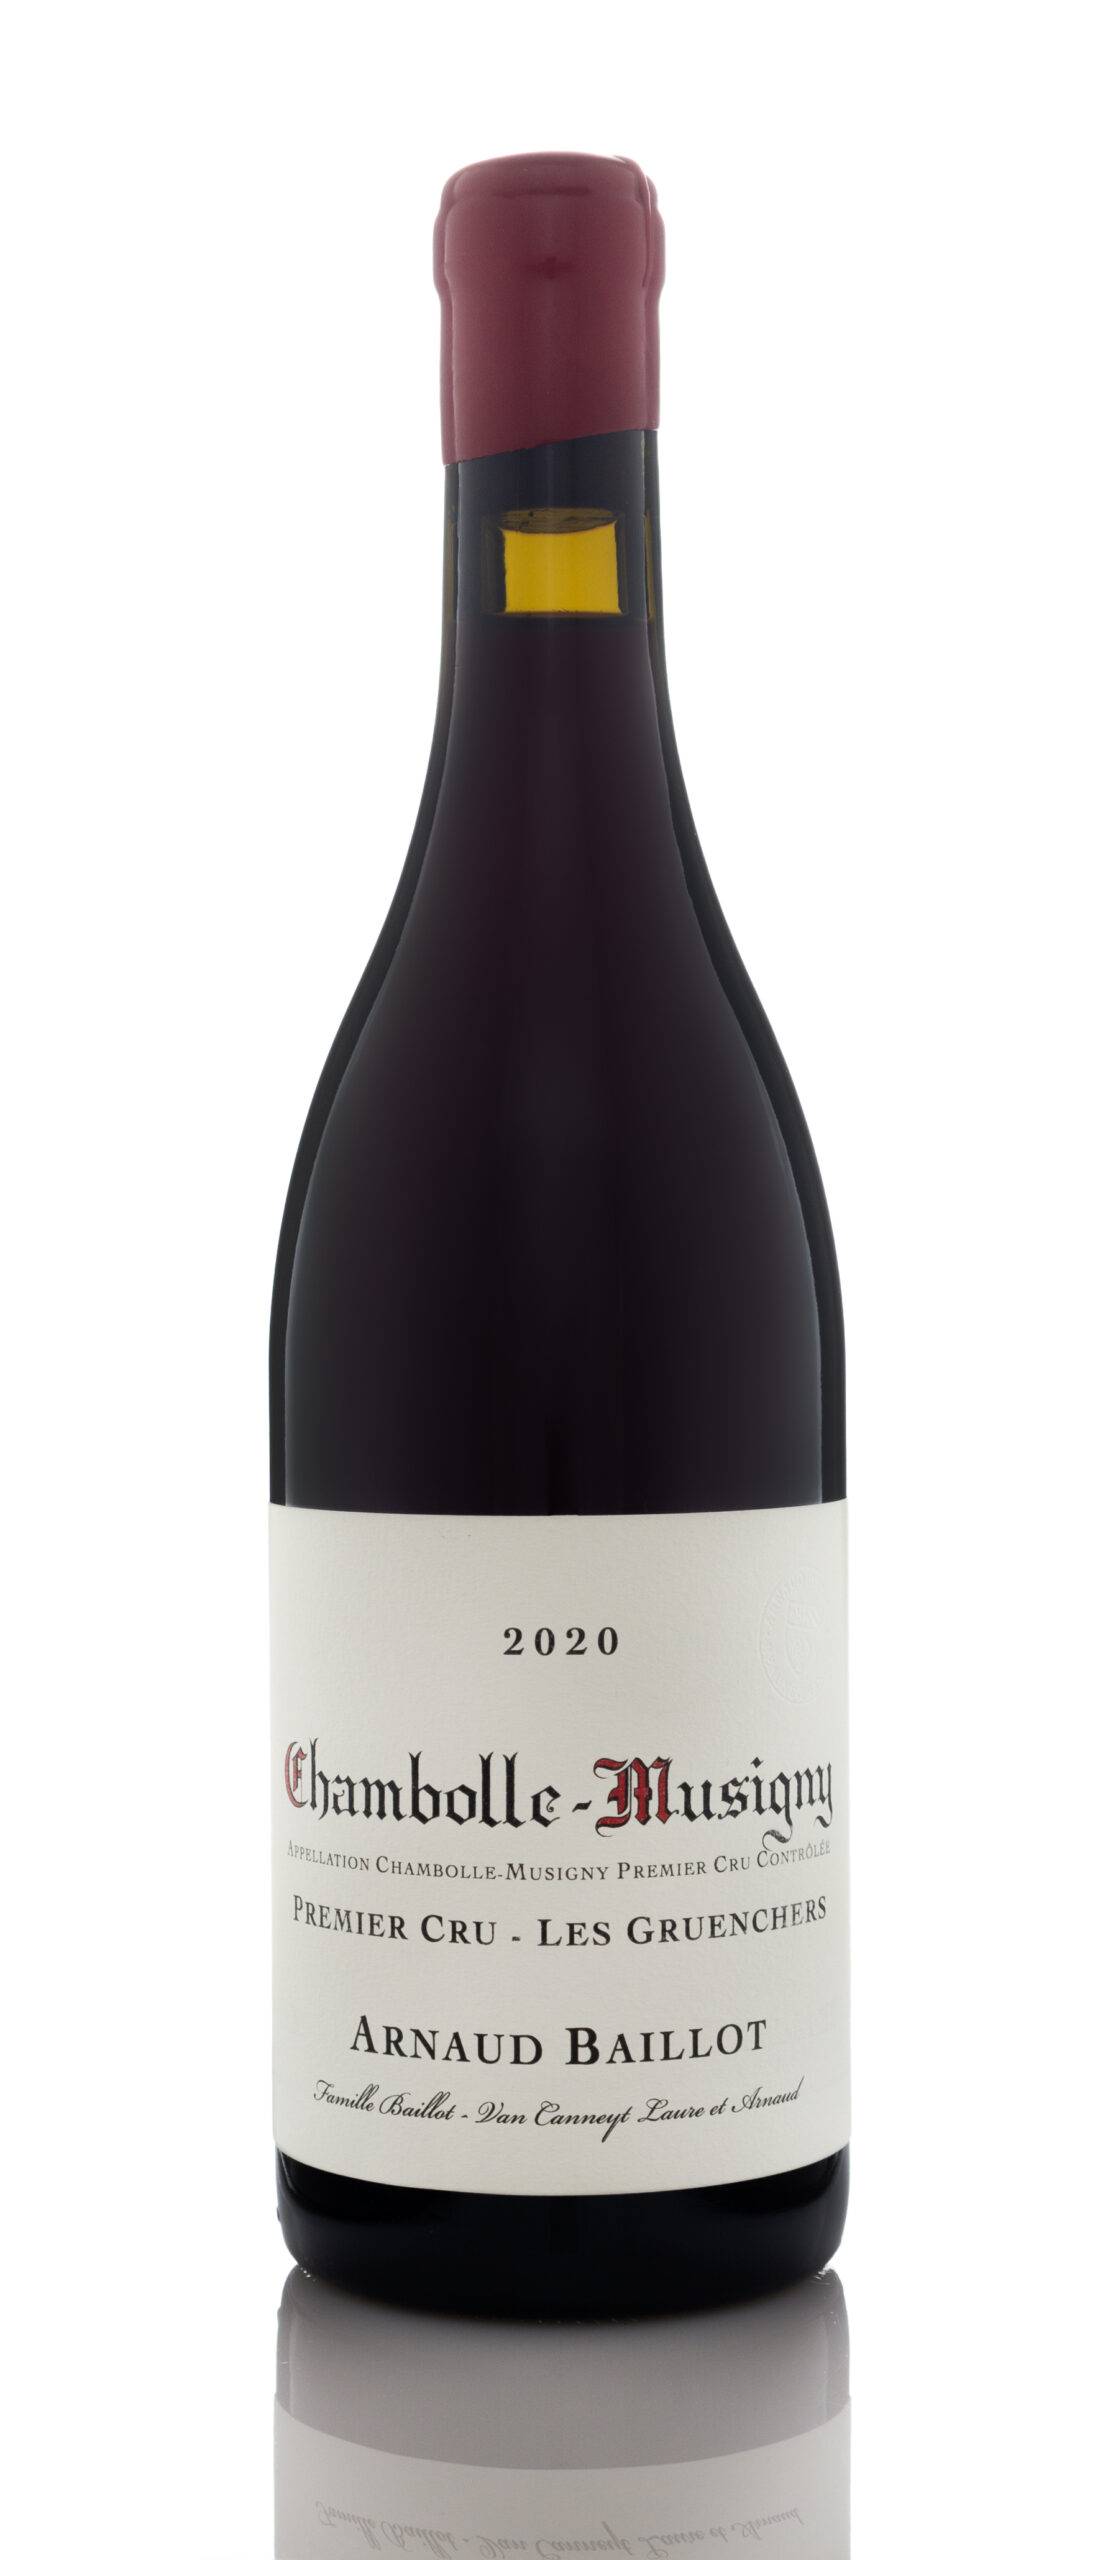 2020 Arnaud Baillot, Les Gruenchers, Chambolle-Musigny, Premier Cru Cote de Nuits